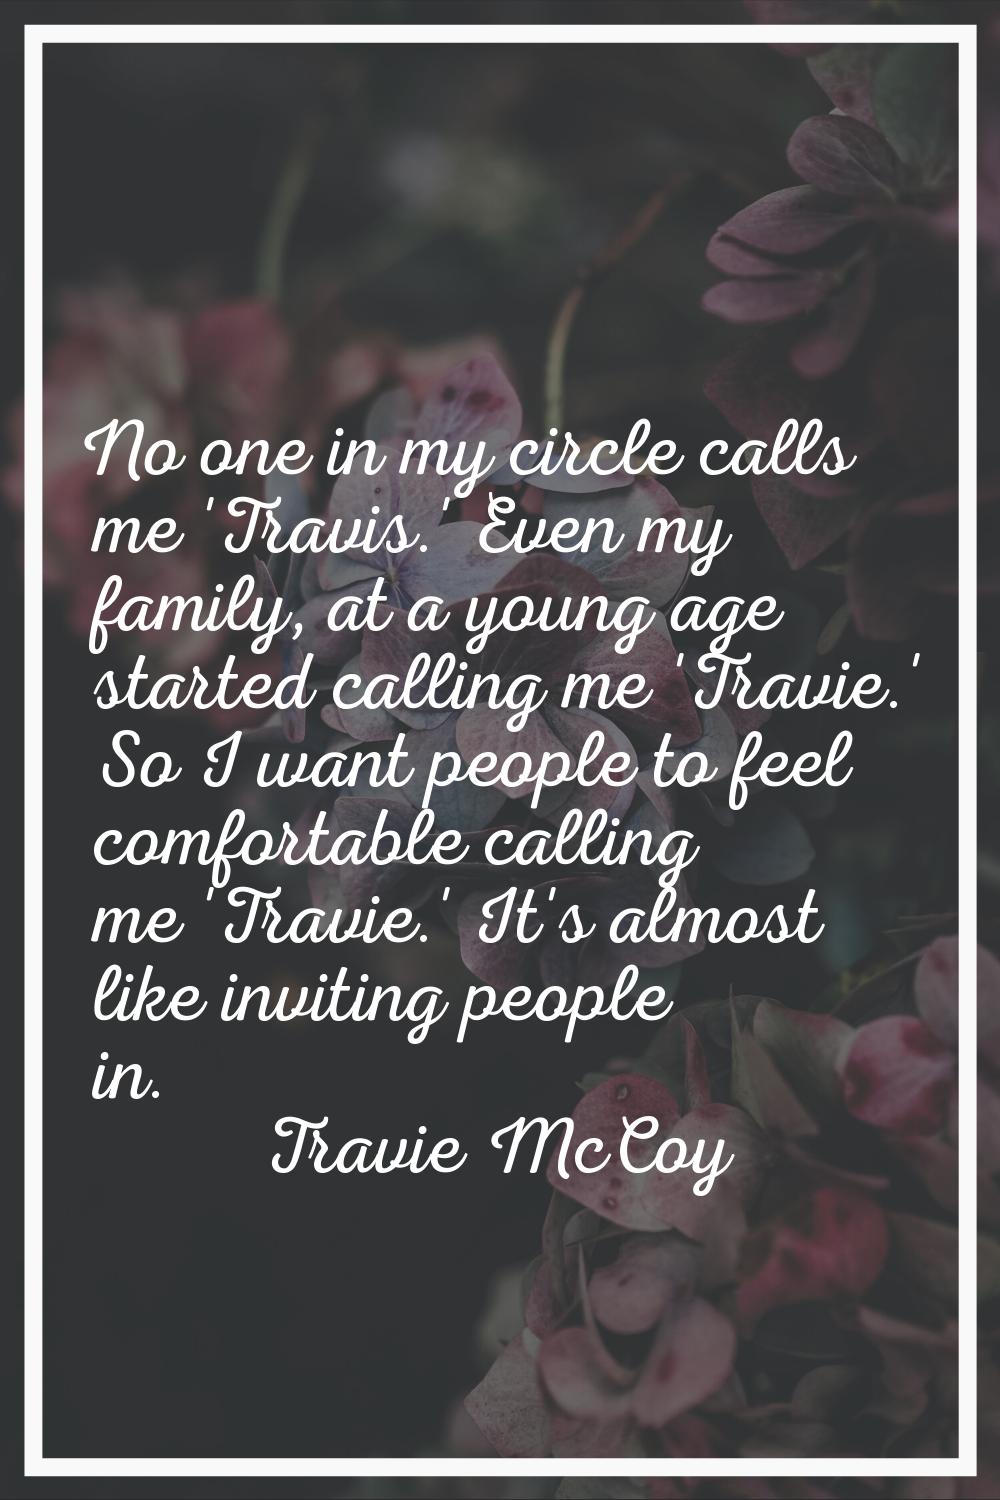 No one in my circle calls me 'Travis.' Even my family, at a young age started calling me 'Travie.' 